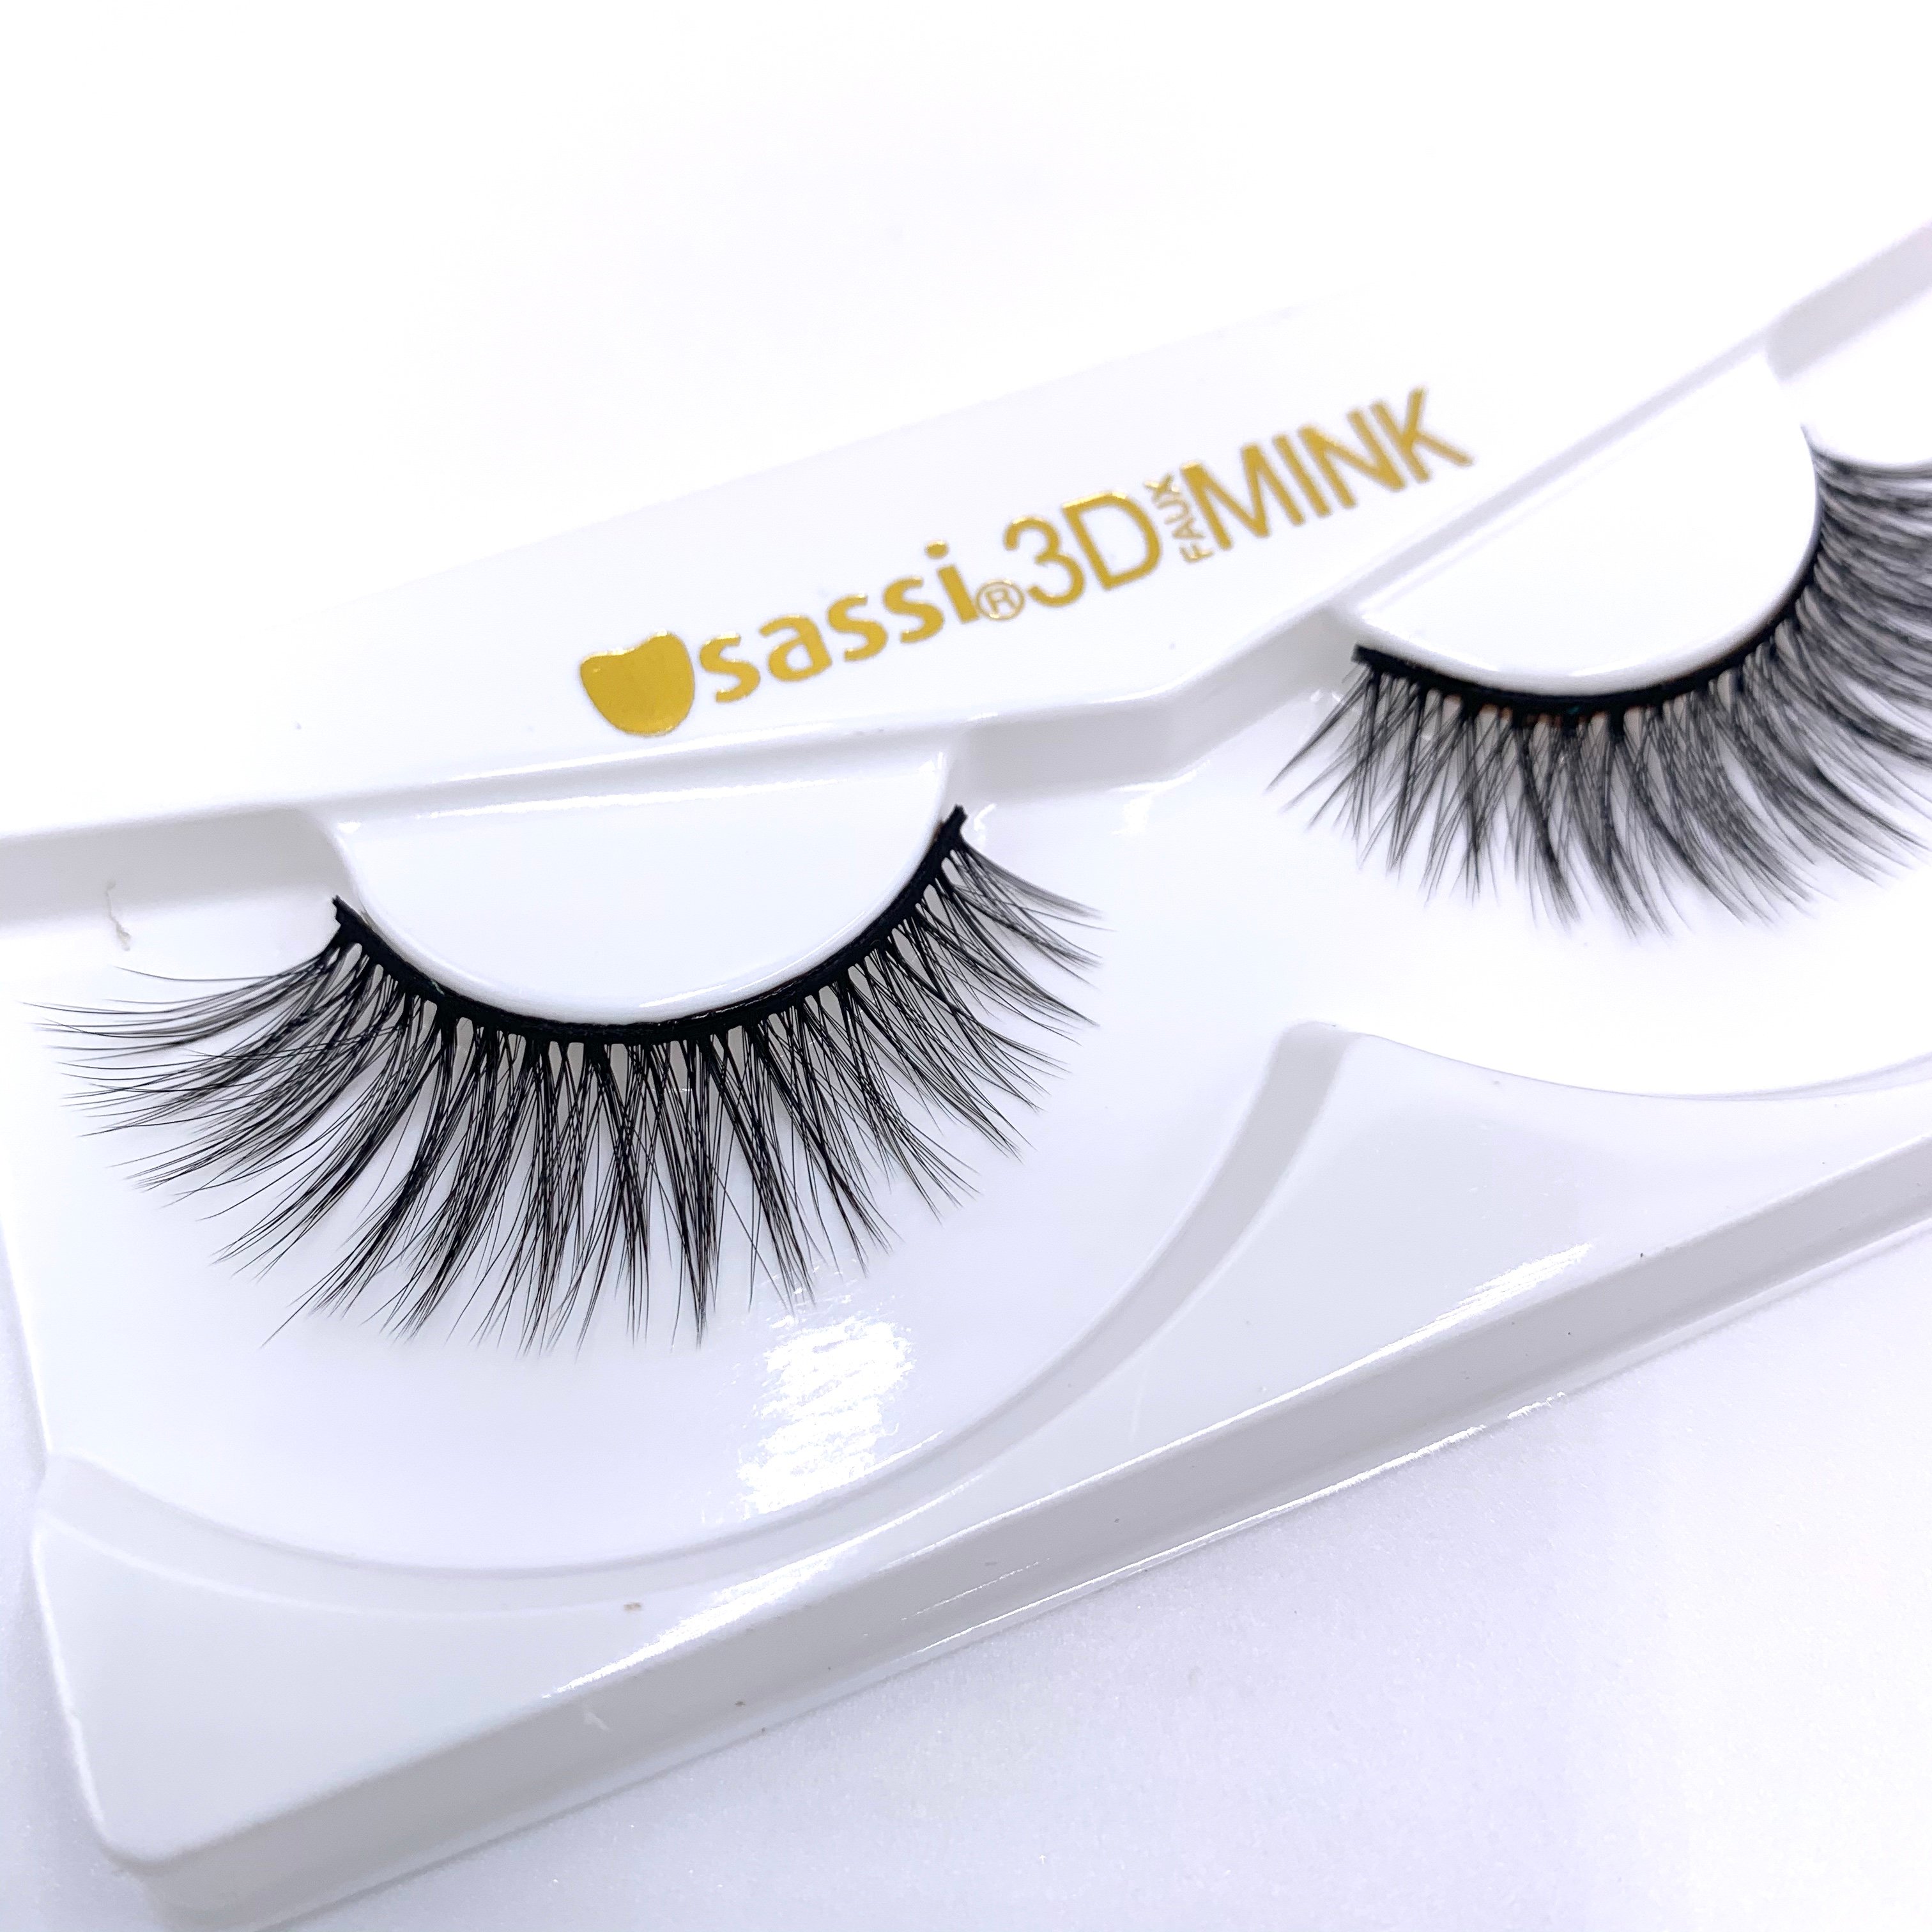 Sassi 3-D Faux Mink Lashes - Classy Lashes Close-Up for Cocotique September 2020